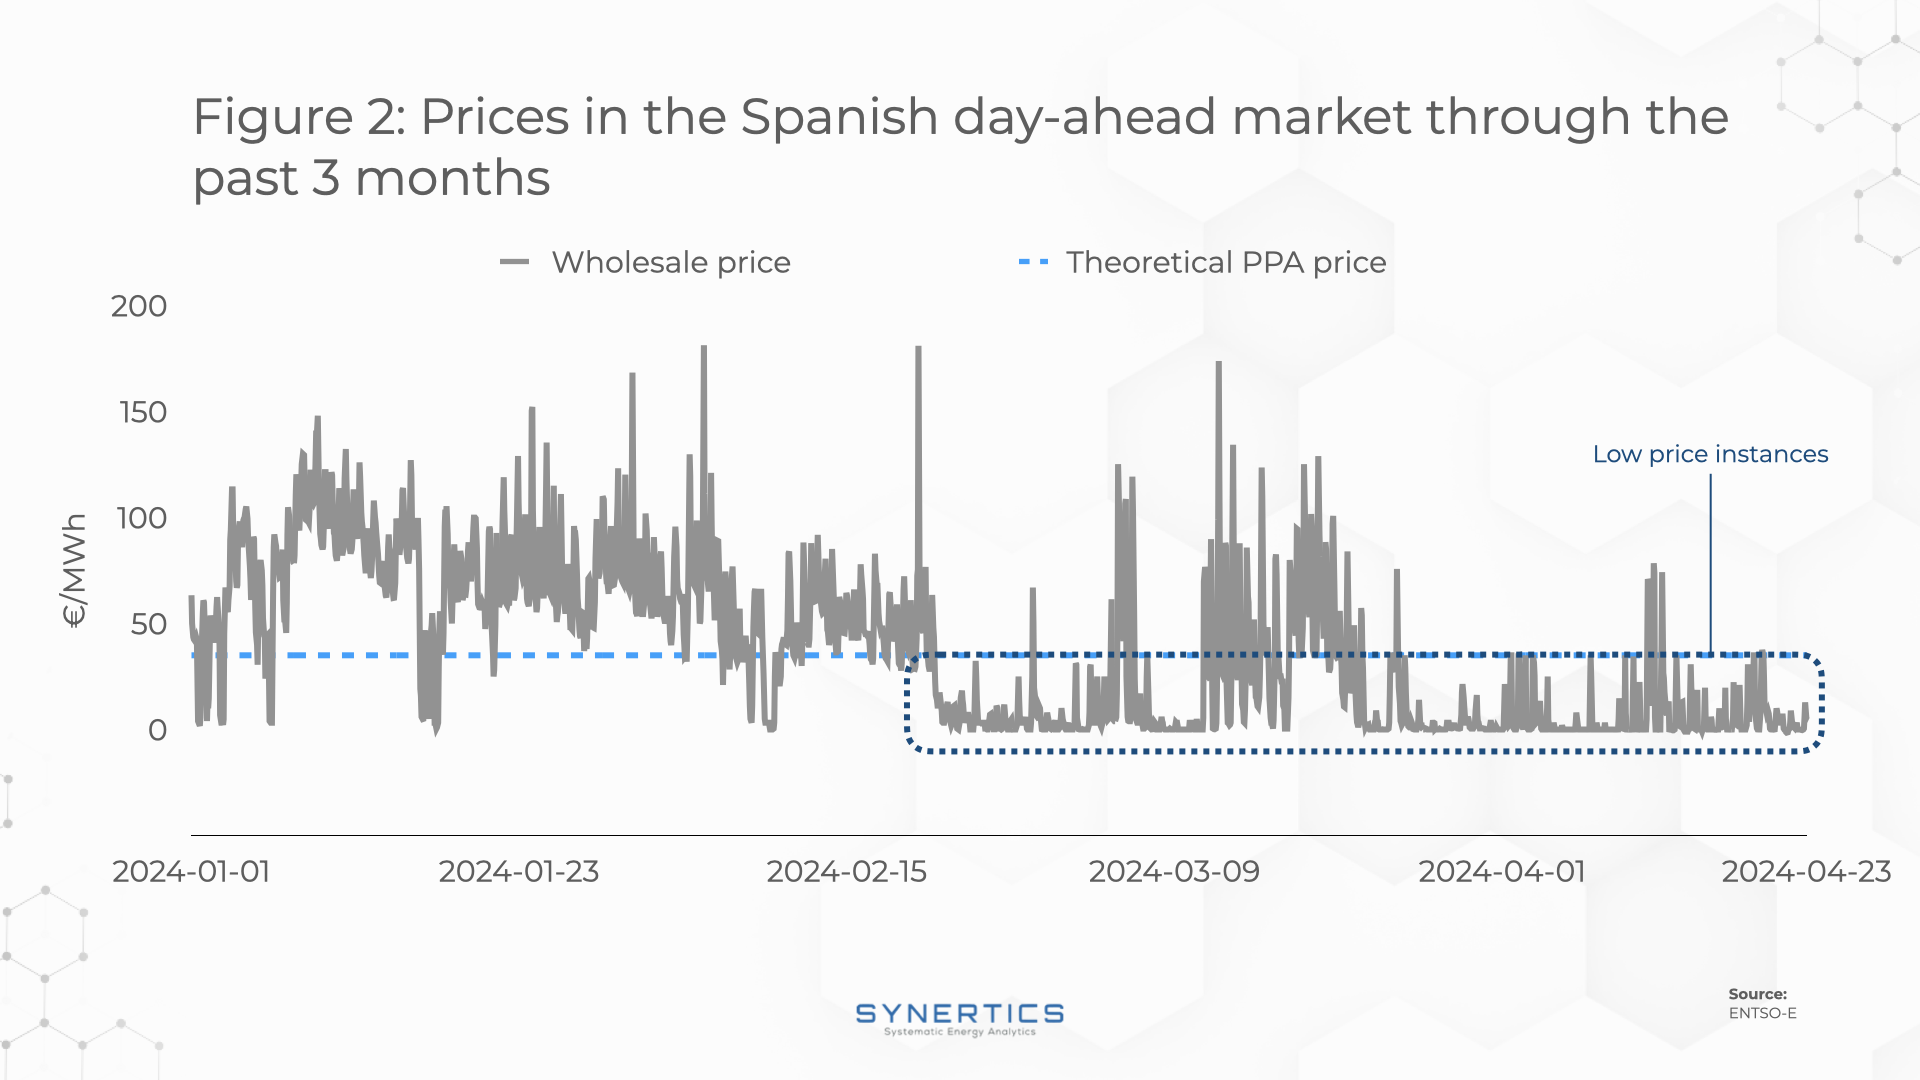 Prices in Spain in the wholesale market for the last 3 months